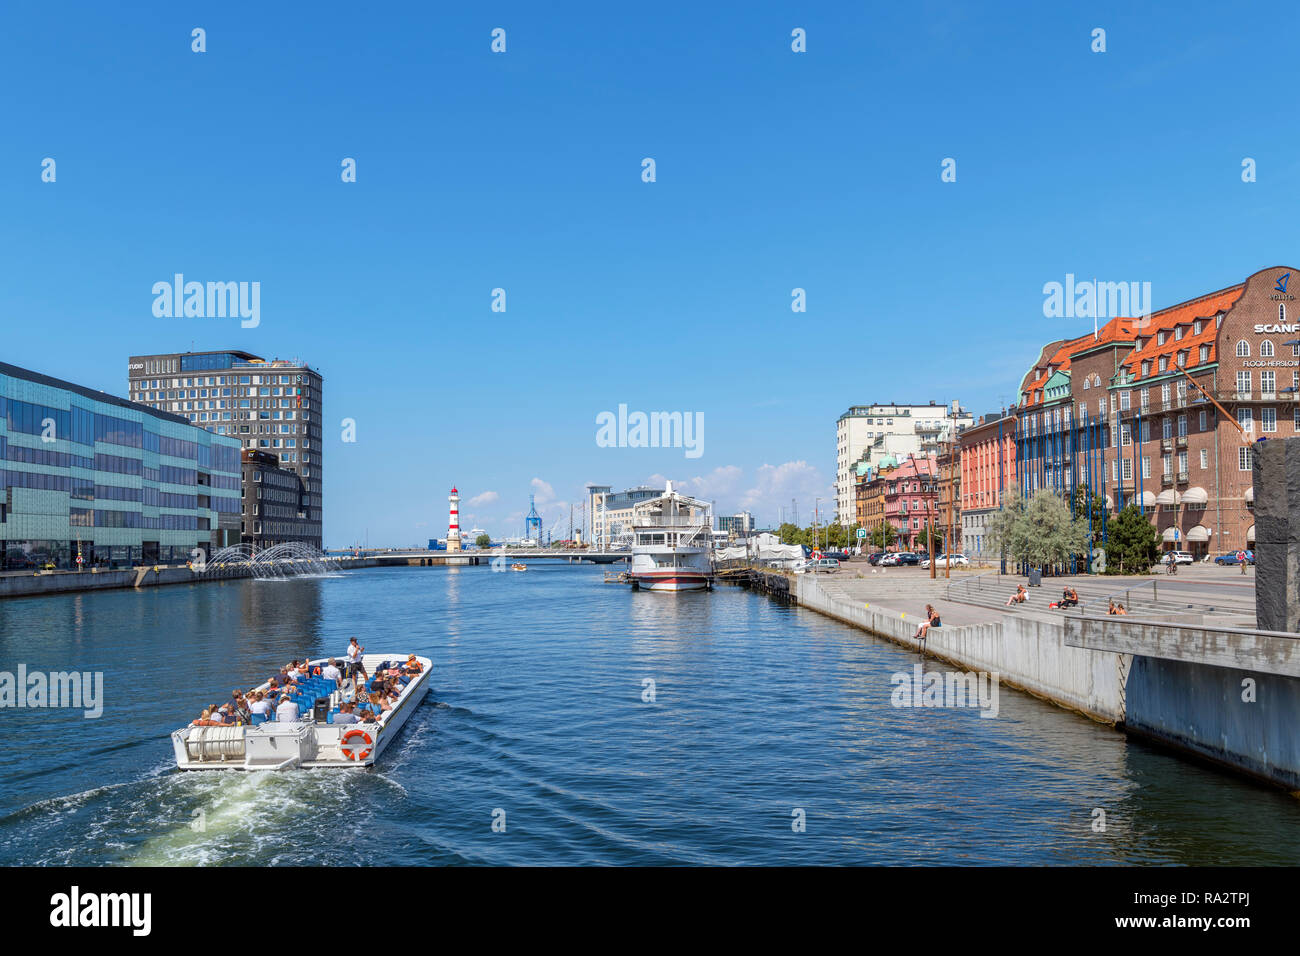 Canal cruise boat in the harbour, Malmo, Scania, Sweden Stock Photo